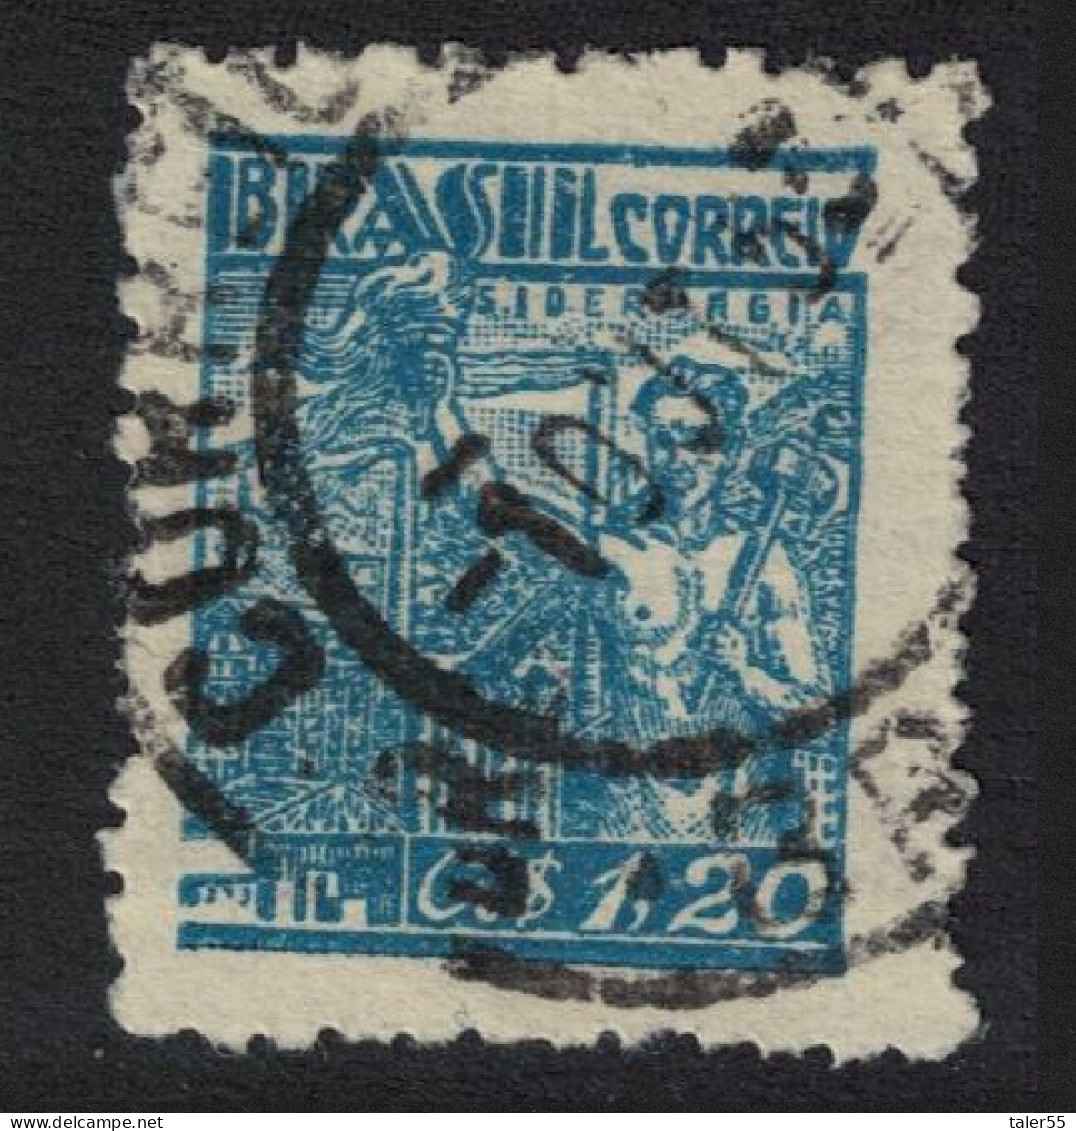 Brazil Definitive Issue 1.20 Cr 1947 SG#761 Sc#665 - Used Stamps